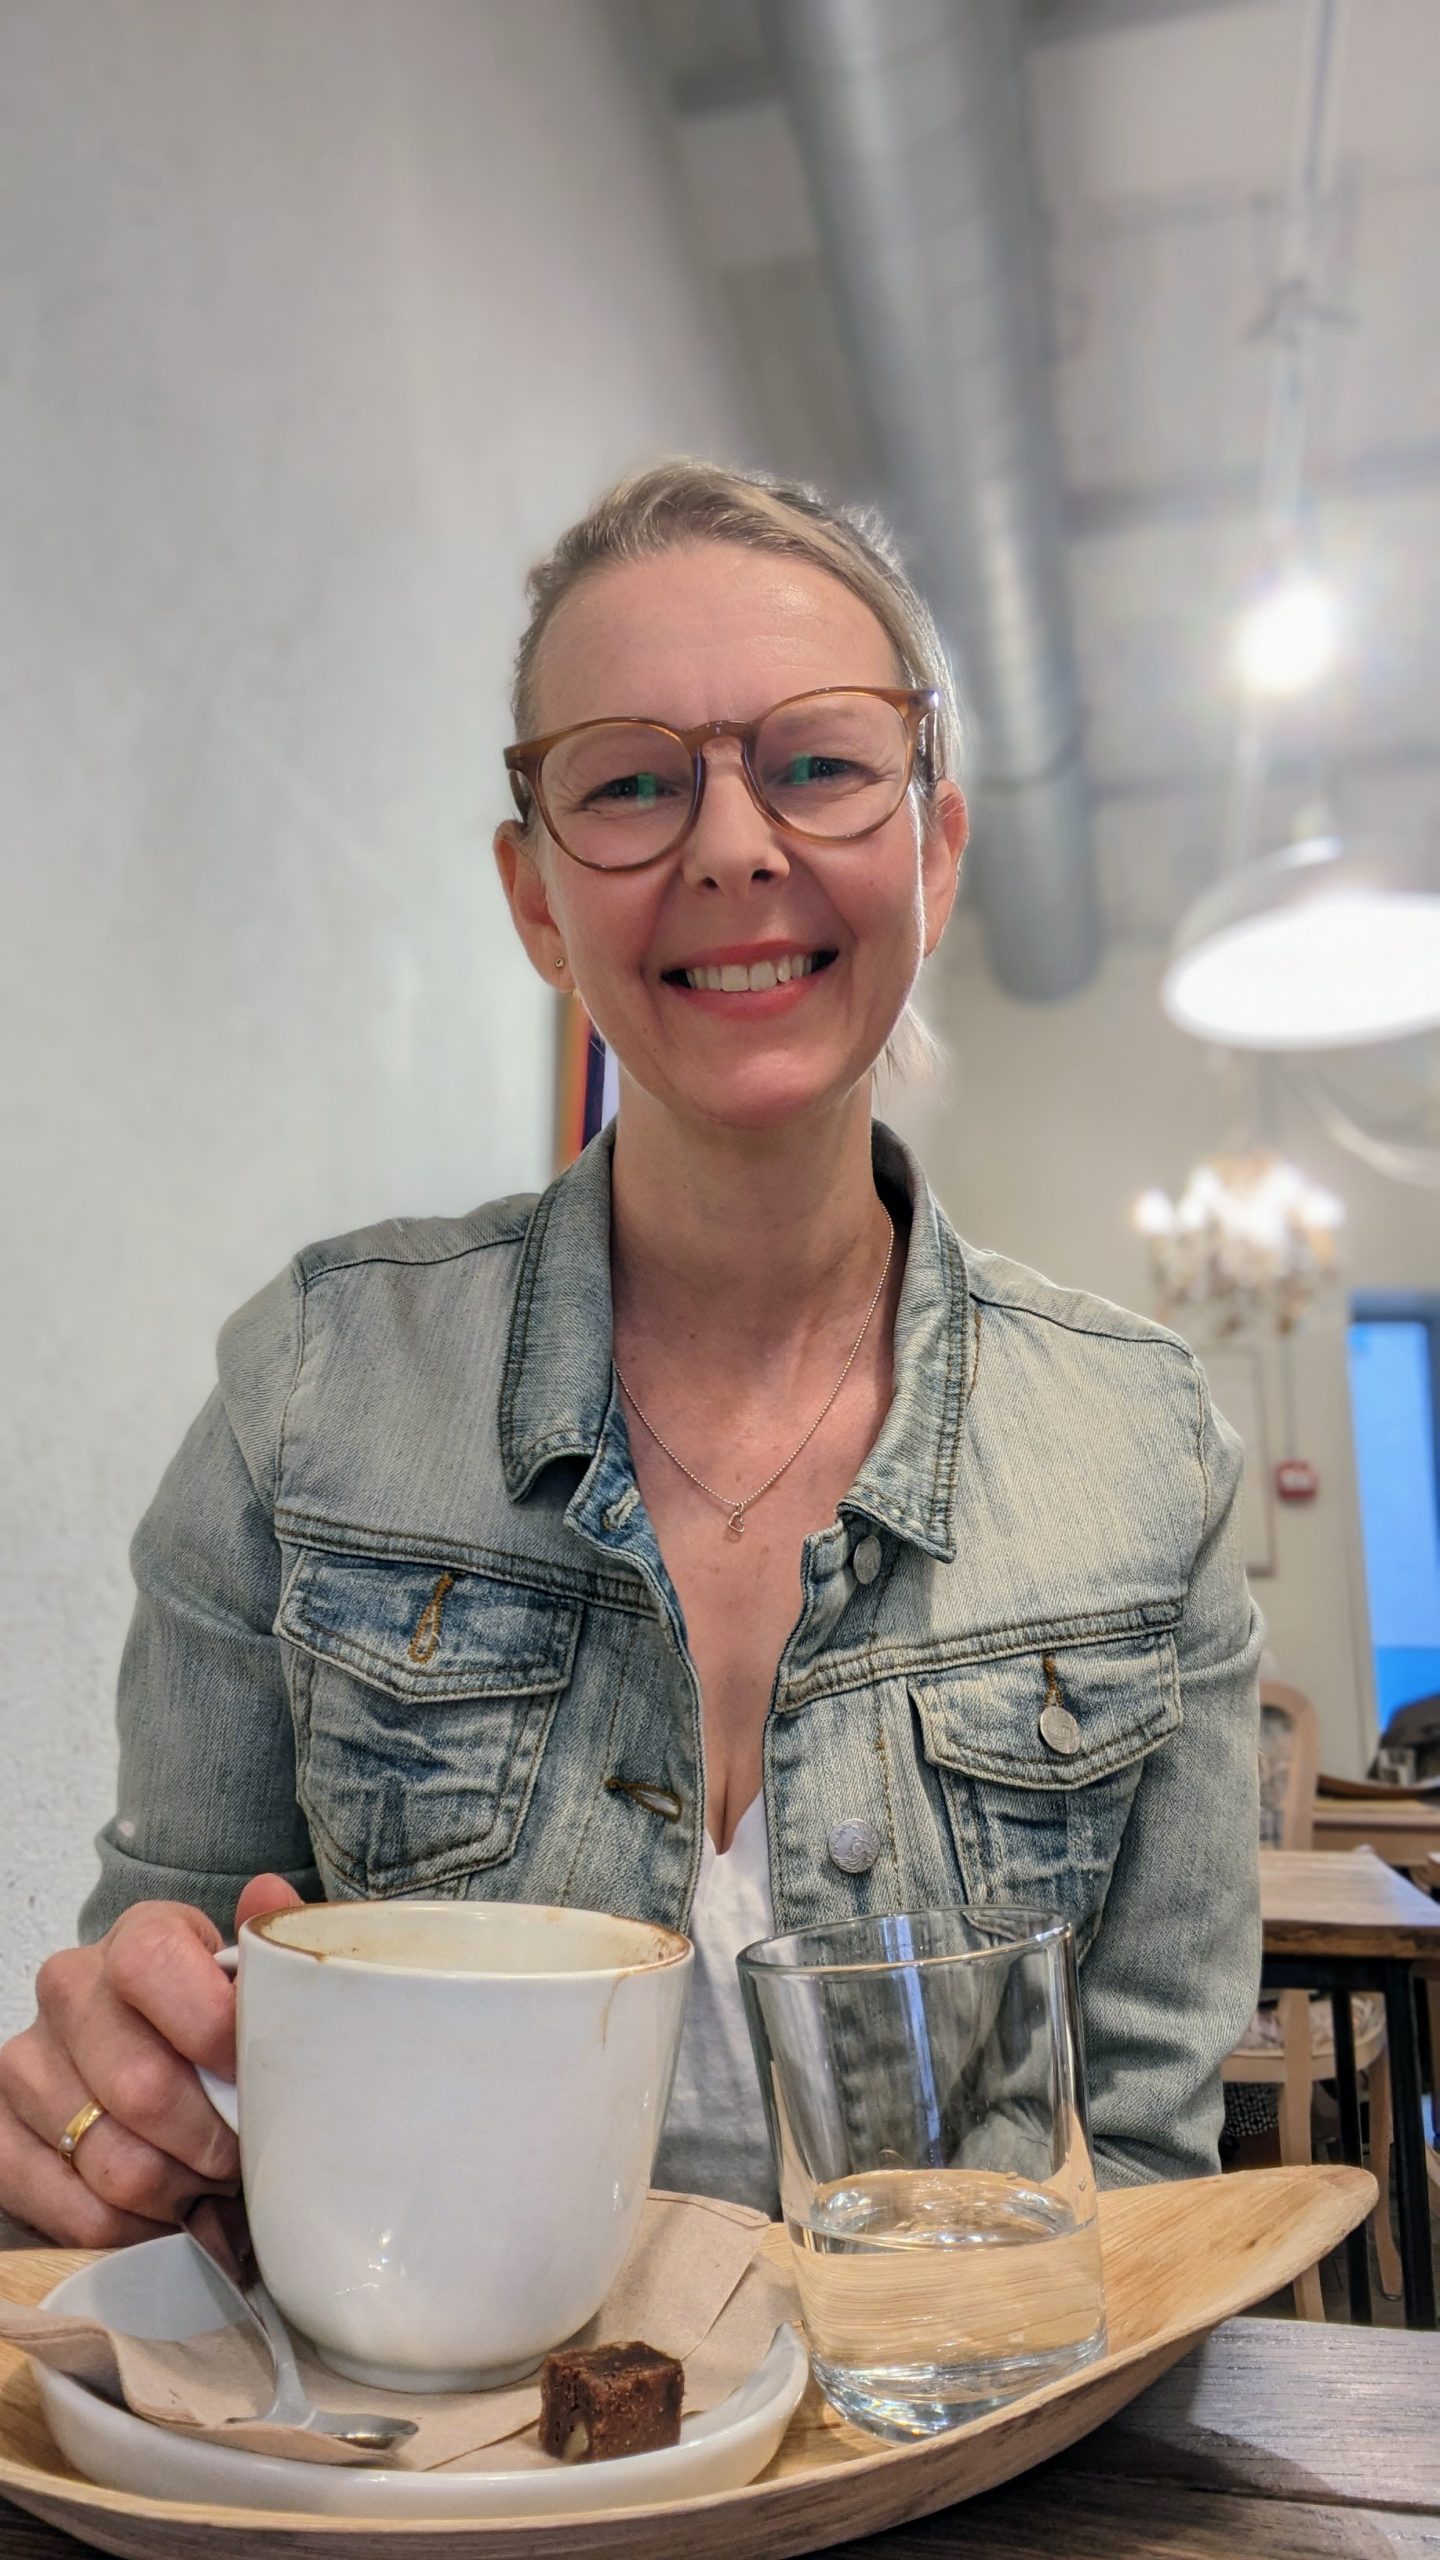 Lia Stoll, a light-skinned woman wearing seeing eye glasses and a jean jacket, holding a cup of coffee.